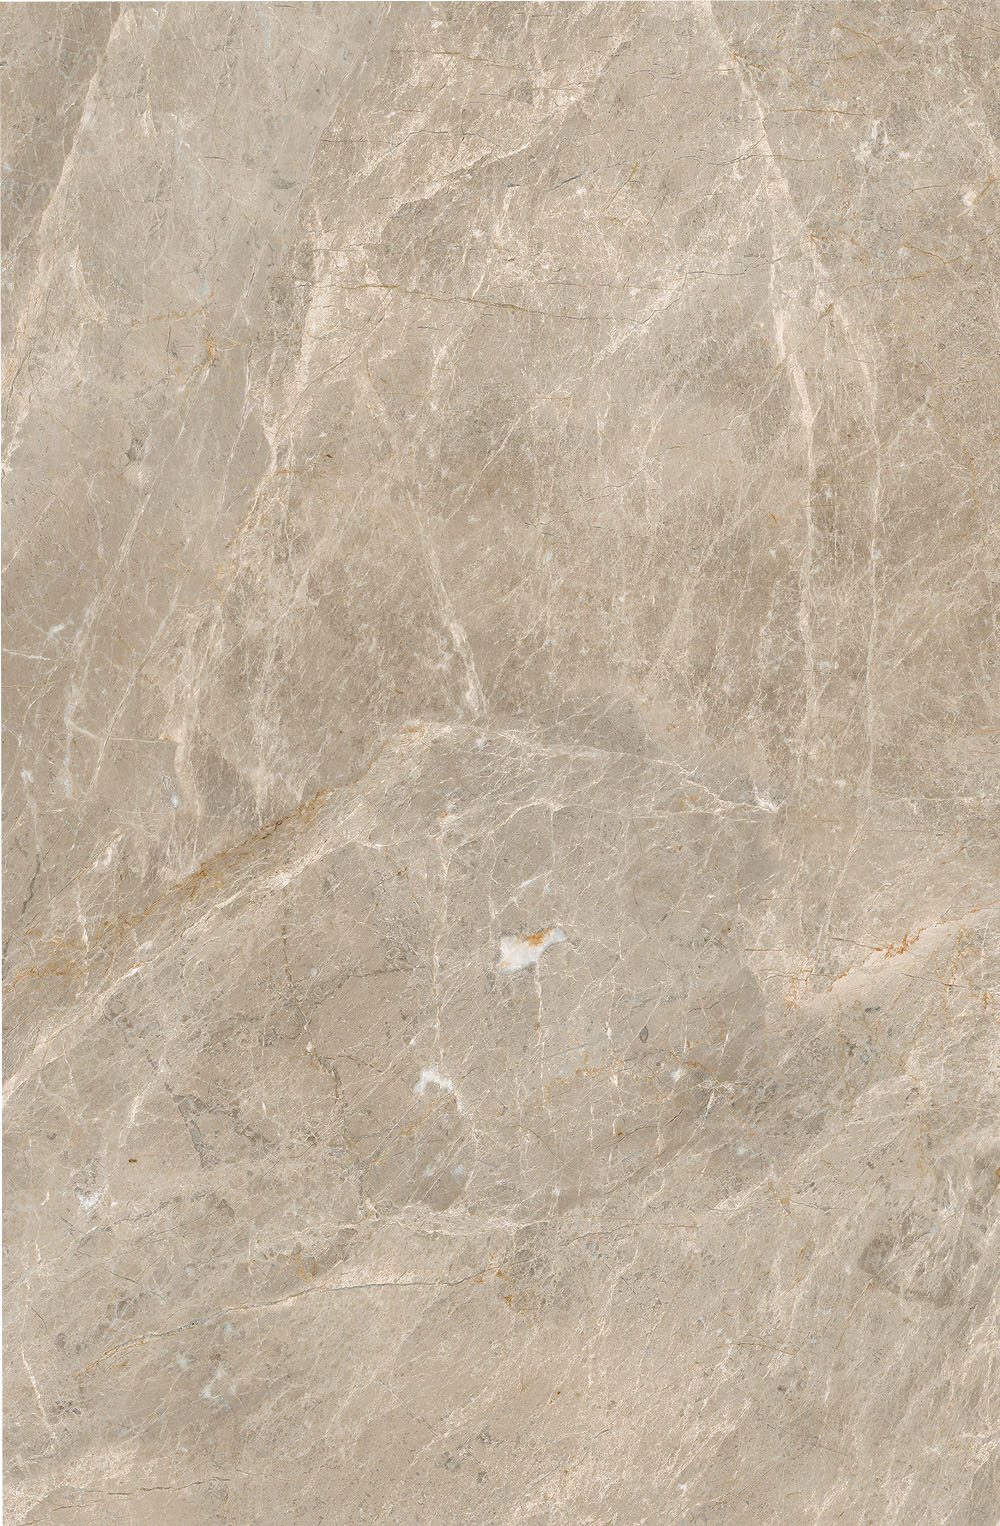 Some little knowledge about porcelain tile